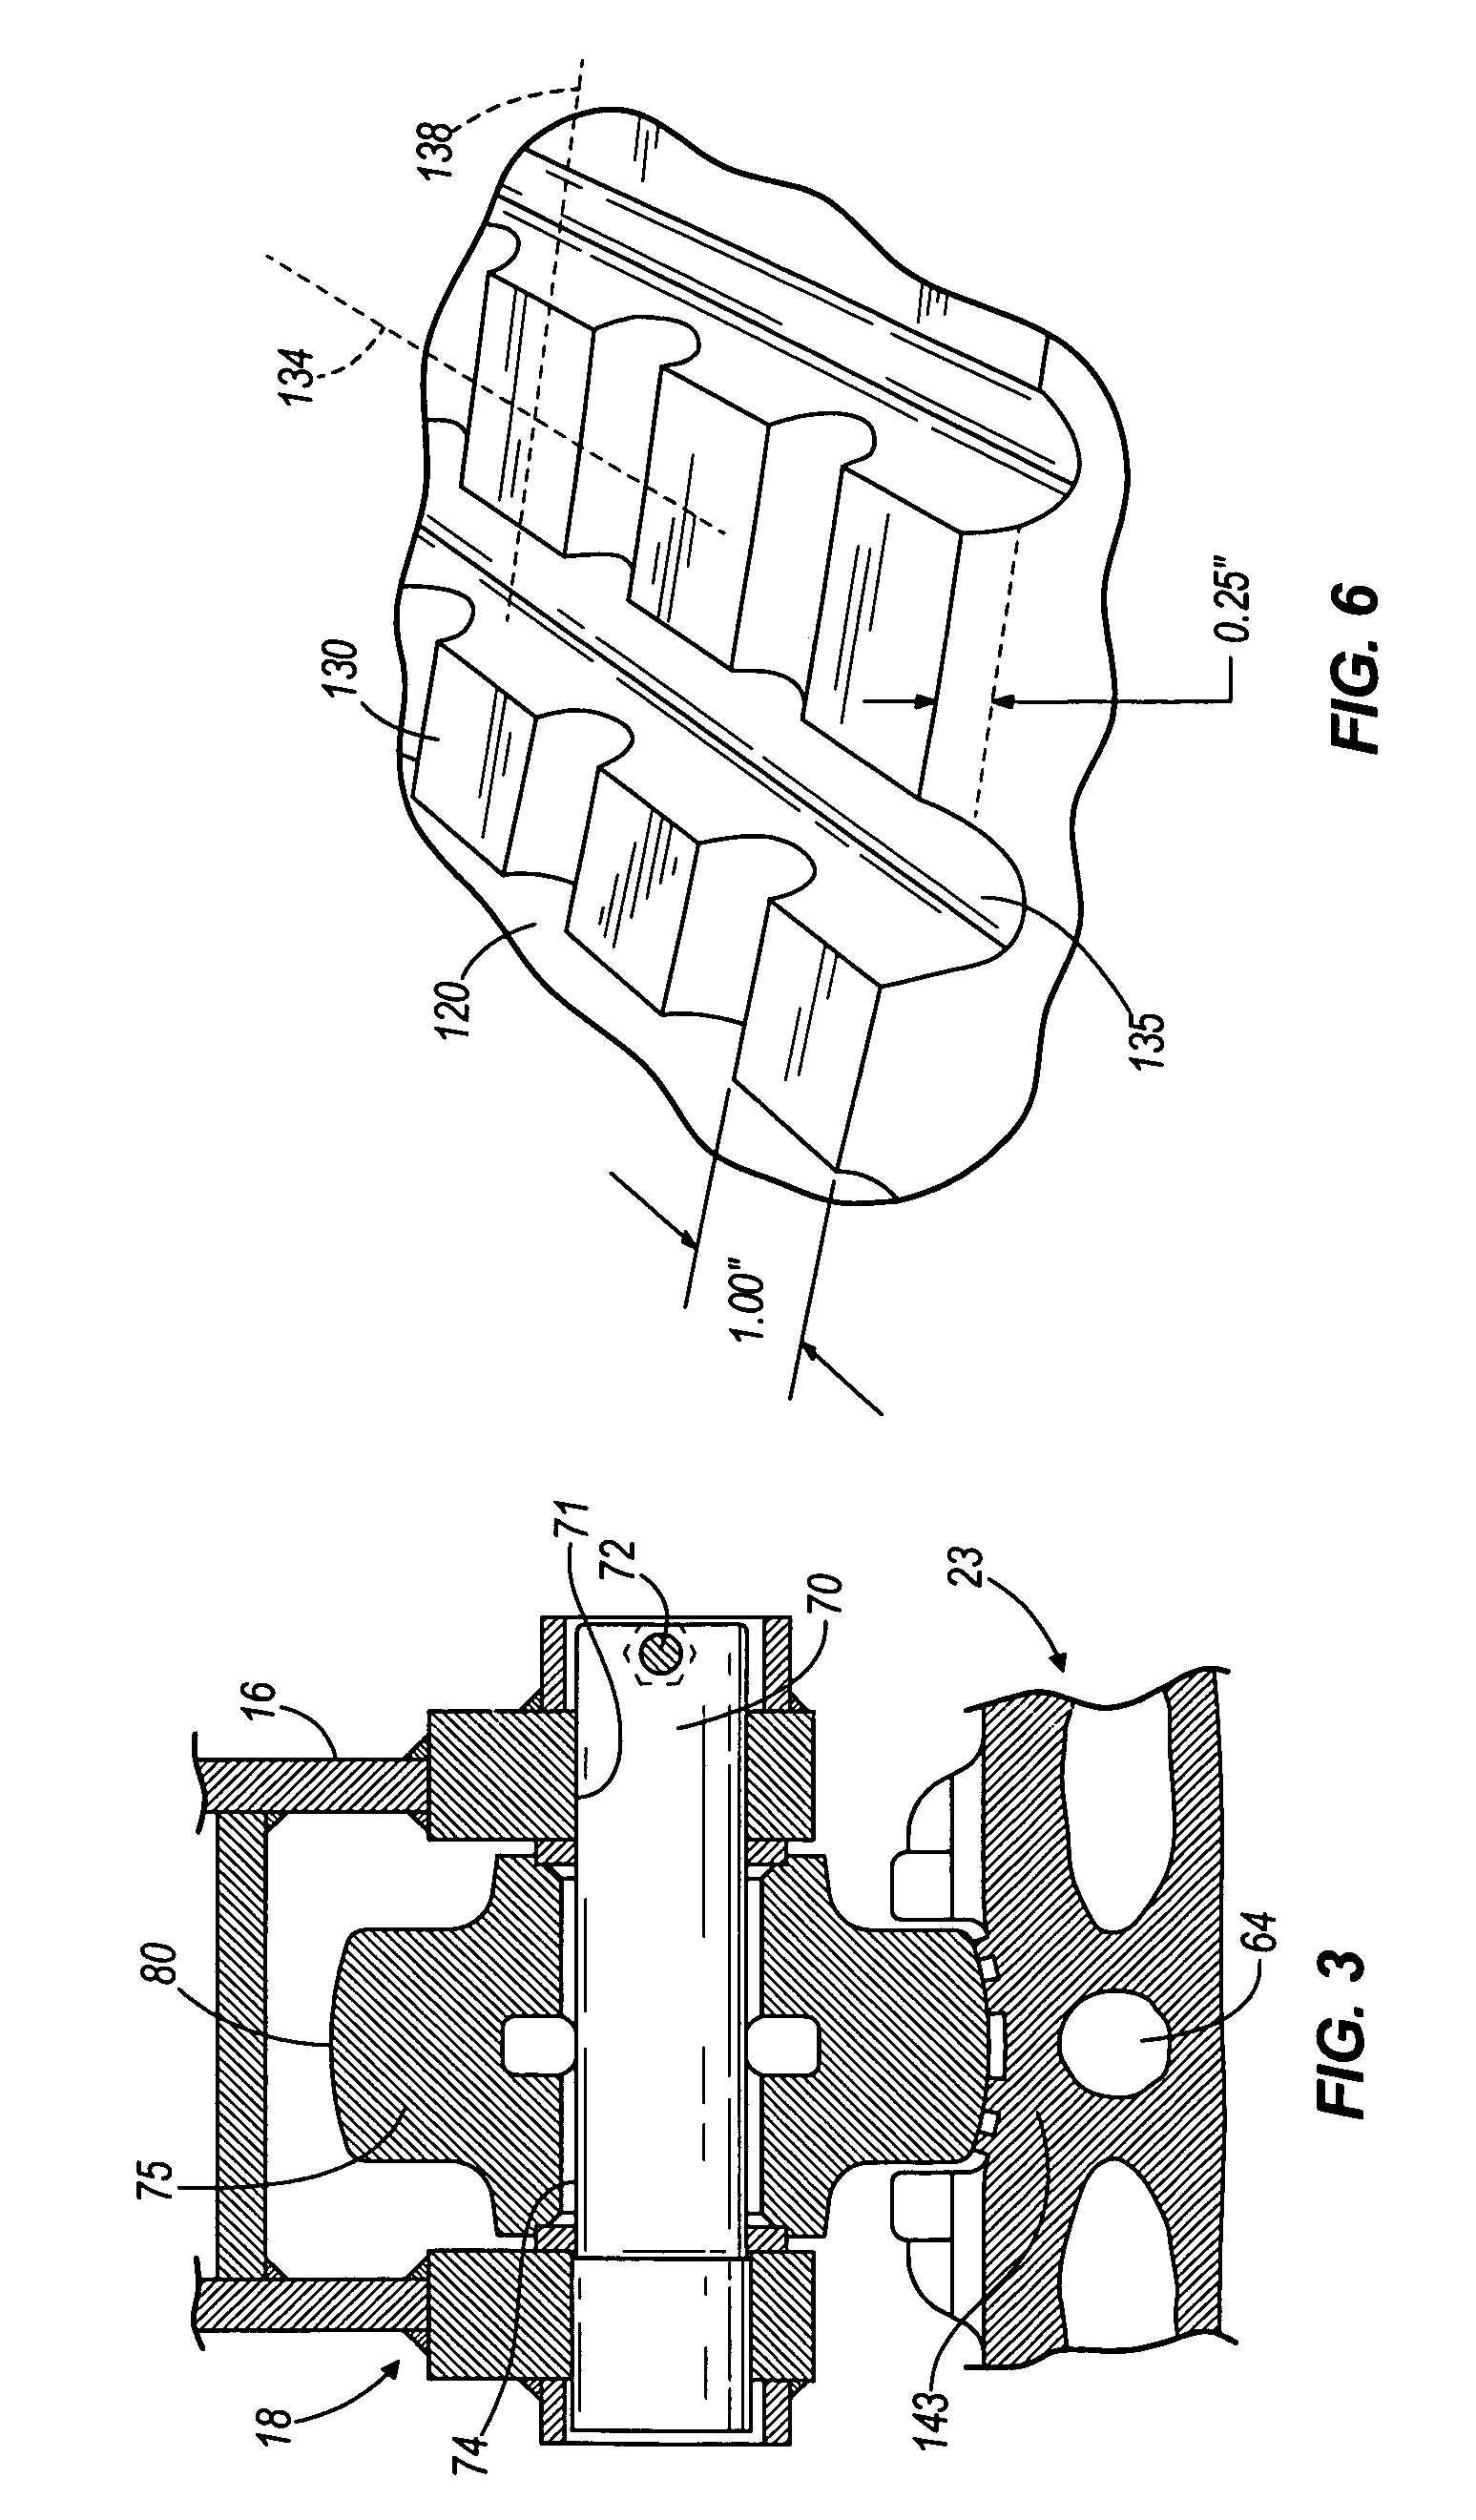 Crawler shoe with peening pads in roller path